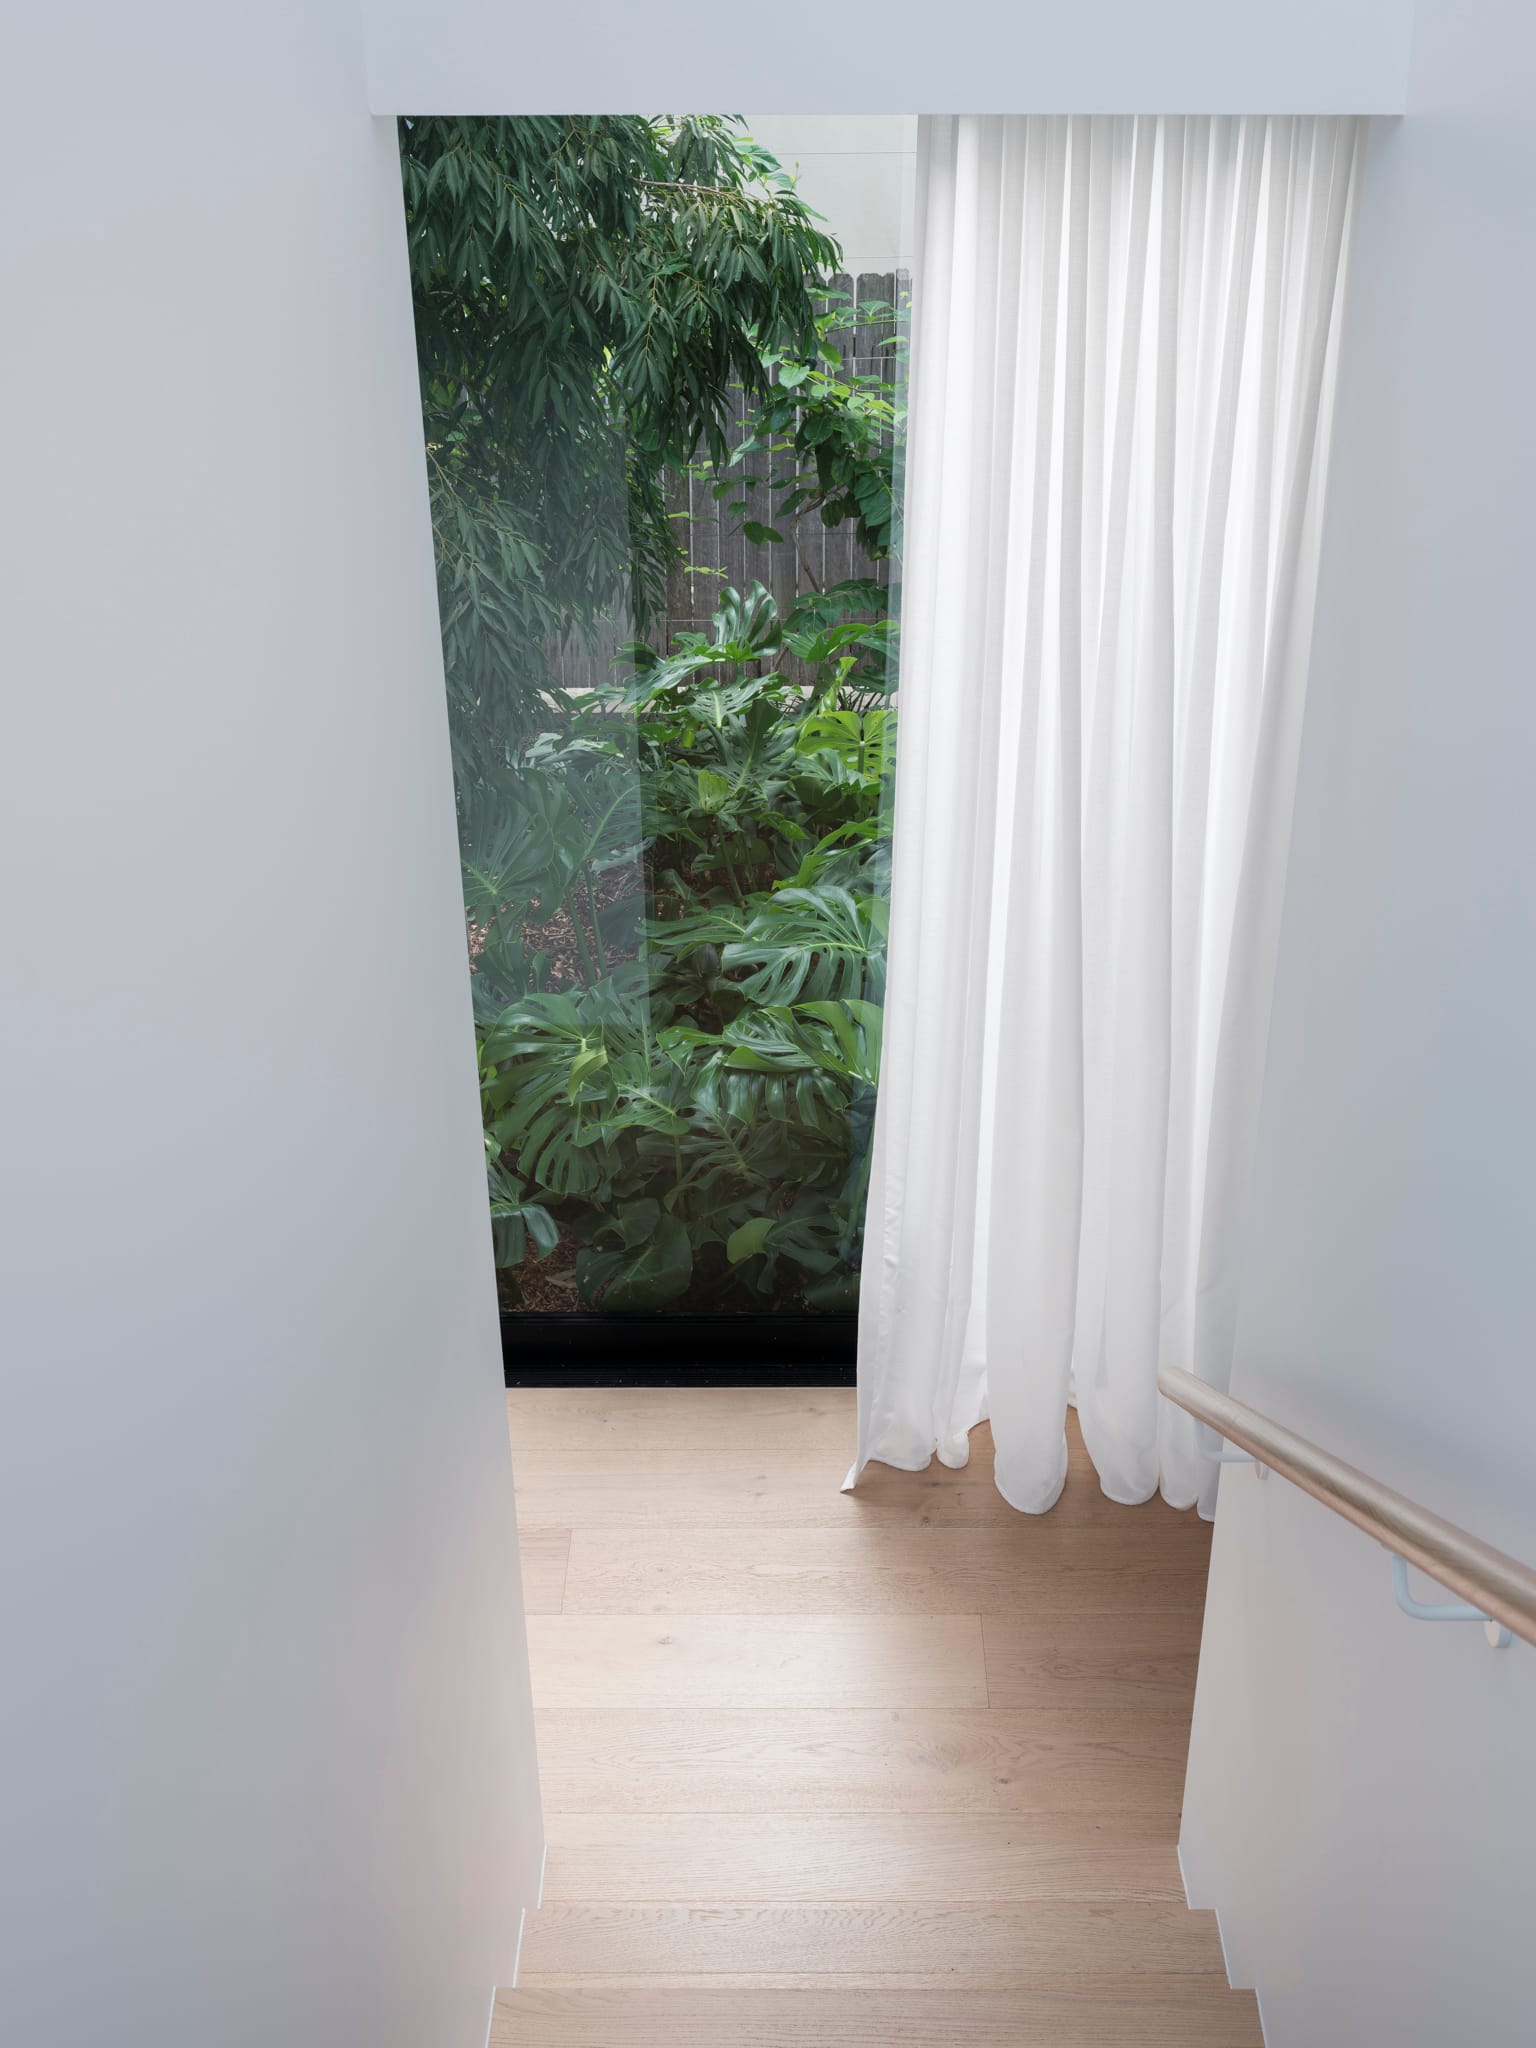 Bellevue House by Carla Middleton Architects. Photography by Tom Ferguson. Floor-to-ceiling window overlooking indoor courtyard at the end of a timber staircase. White curtains and walls. 